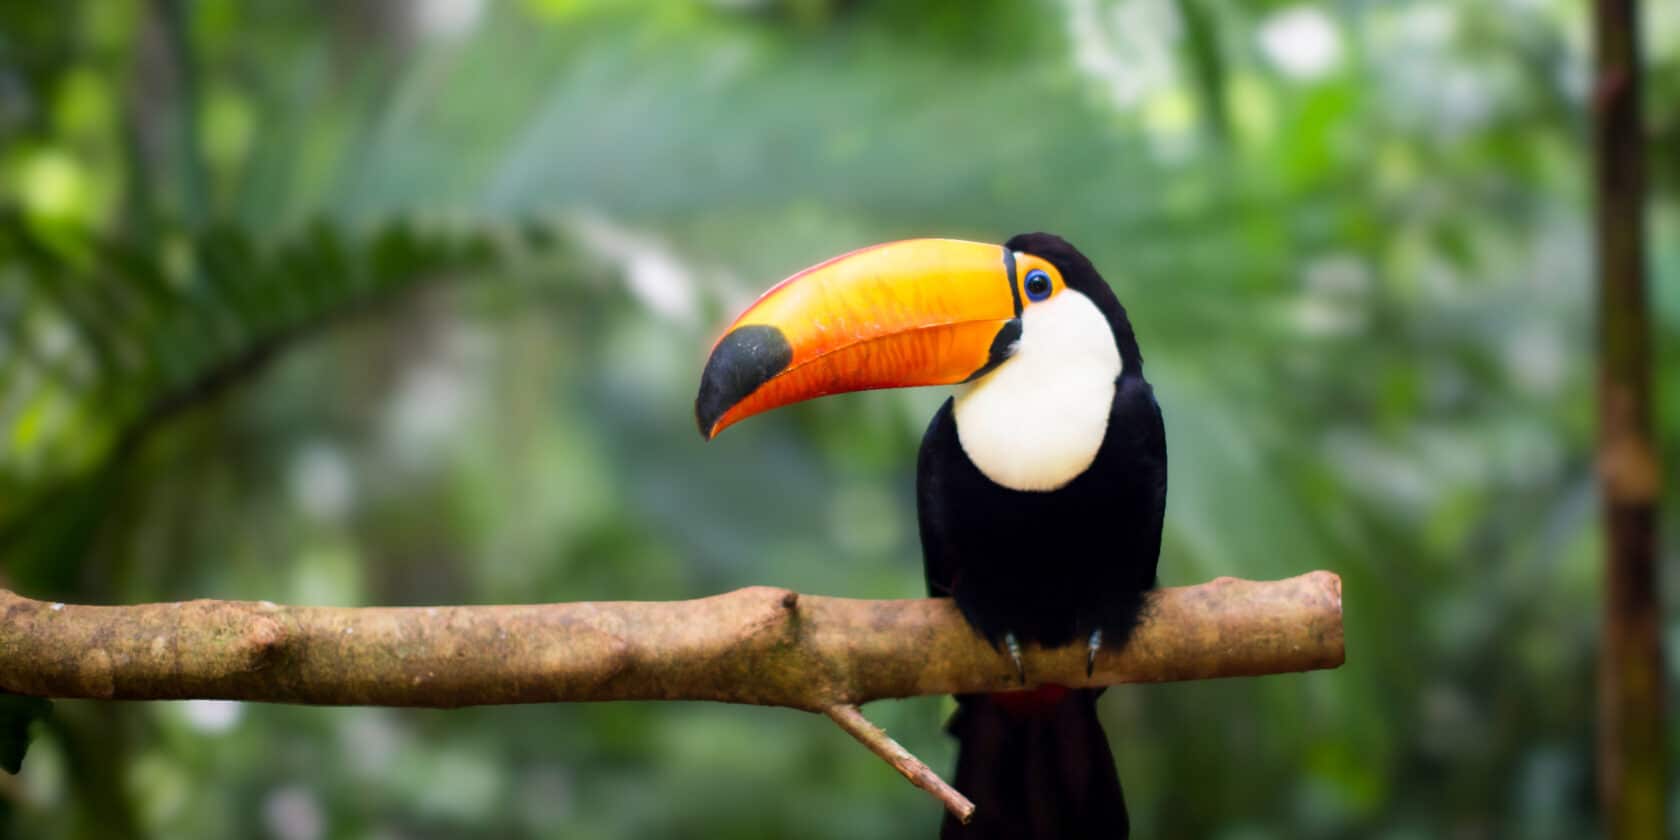 Toucan resting on the branch in the wild.